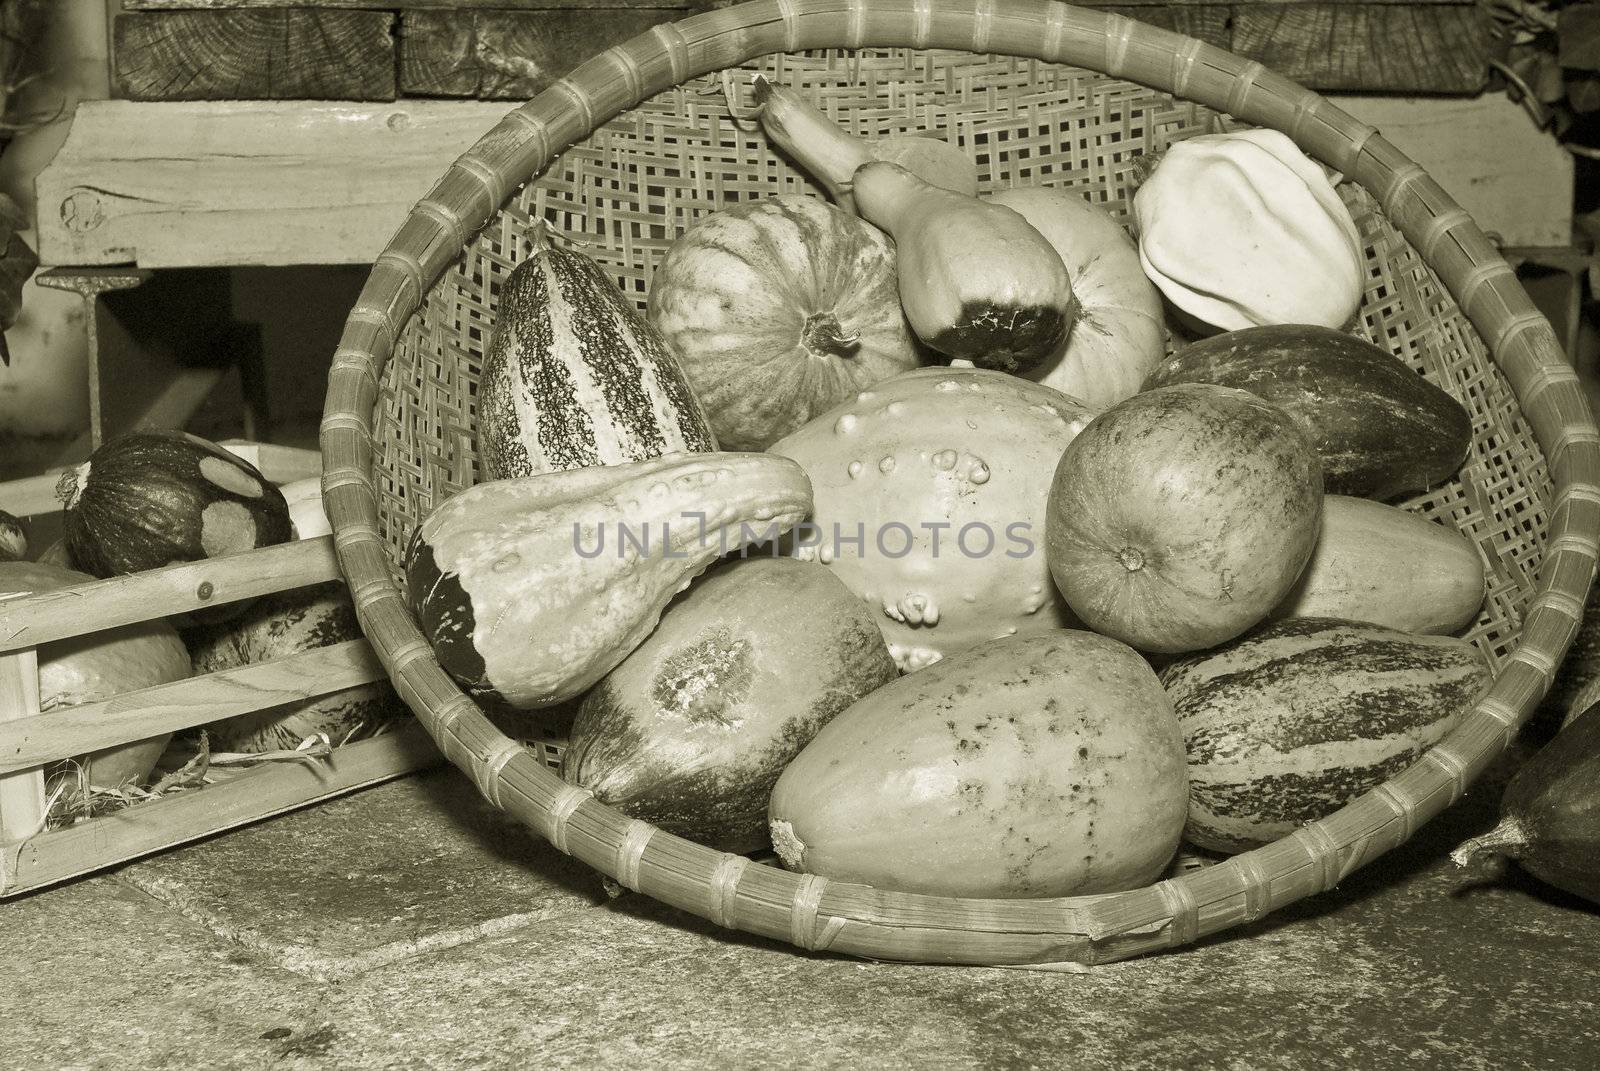 a basket full of pumpkins in monochrome color